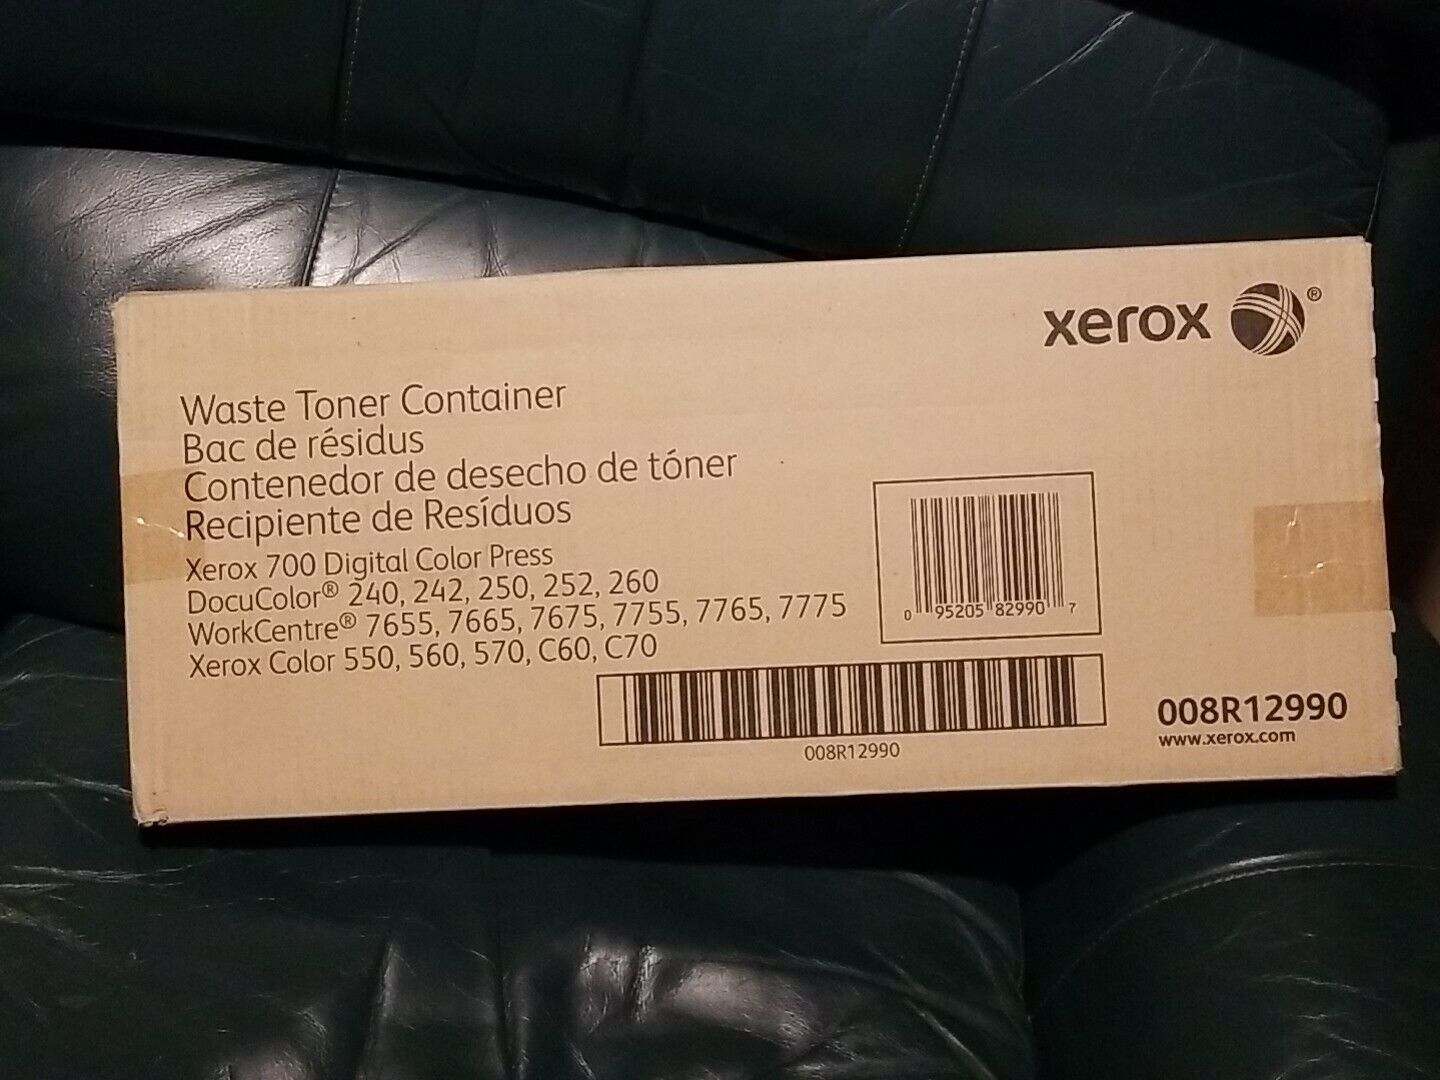 Brand NEW-UNOPENED Xerox 700 Digital Color Press Waste Toner Container 008R12990